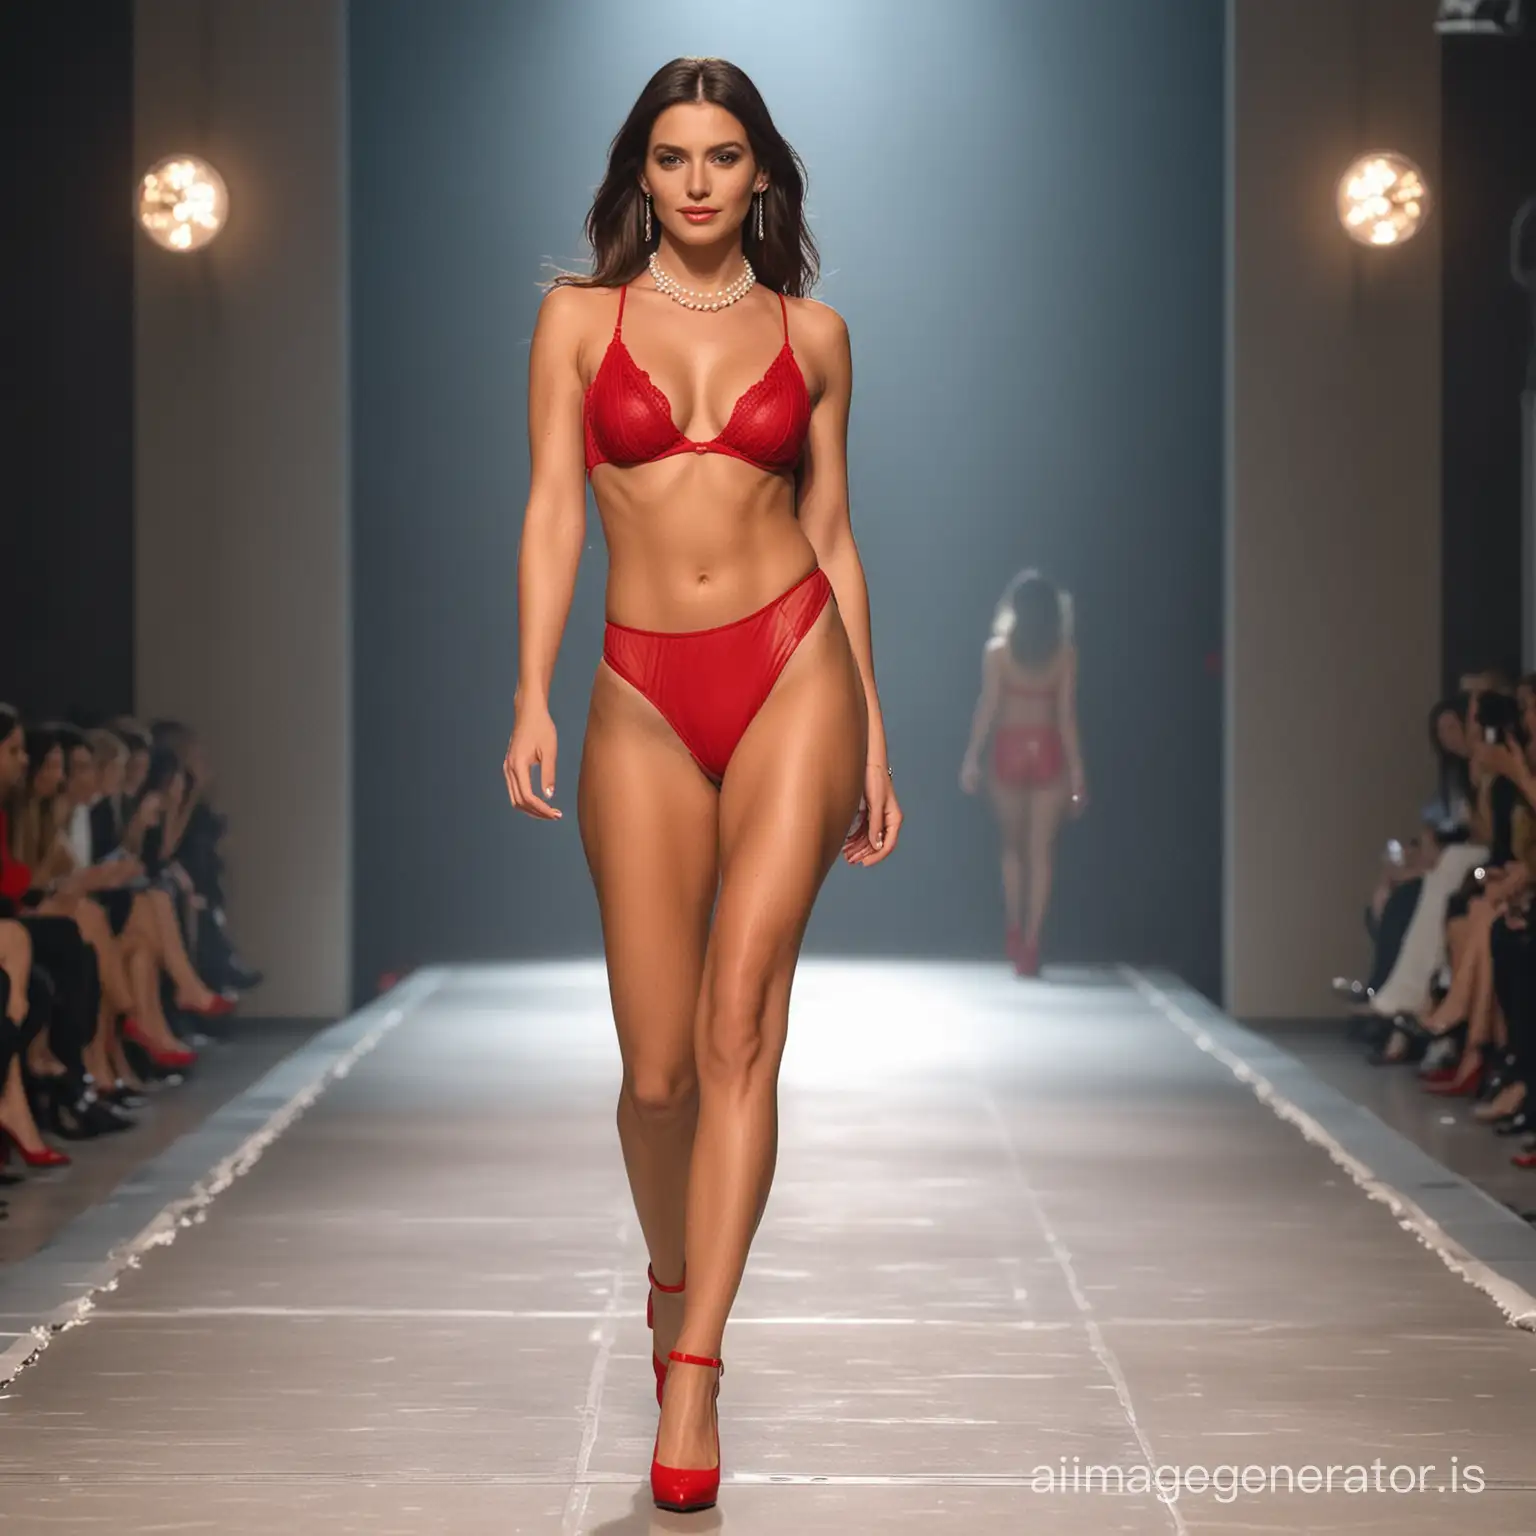 Stunning-Italian-Influencer-Model-Strutting-in-Red-Stiletto-Underwear-and-Pearl-Necklace